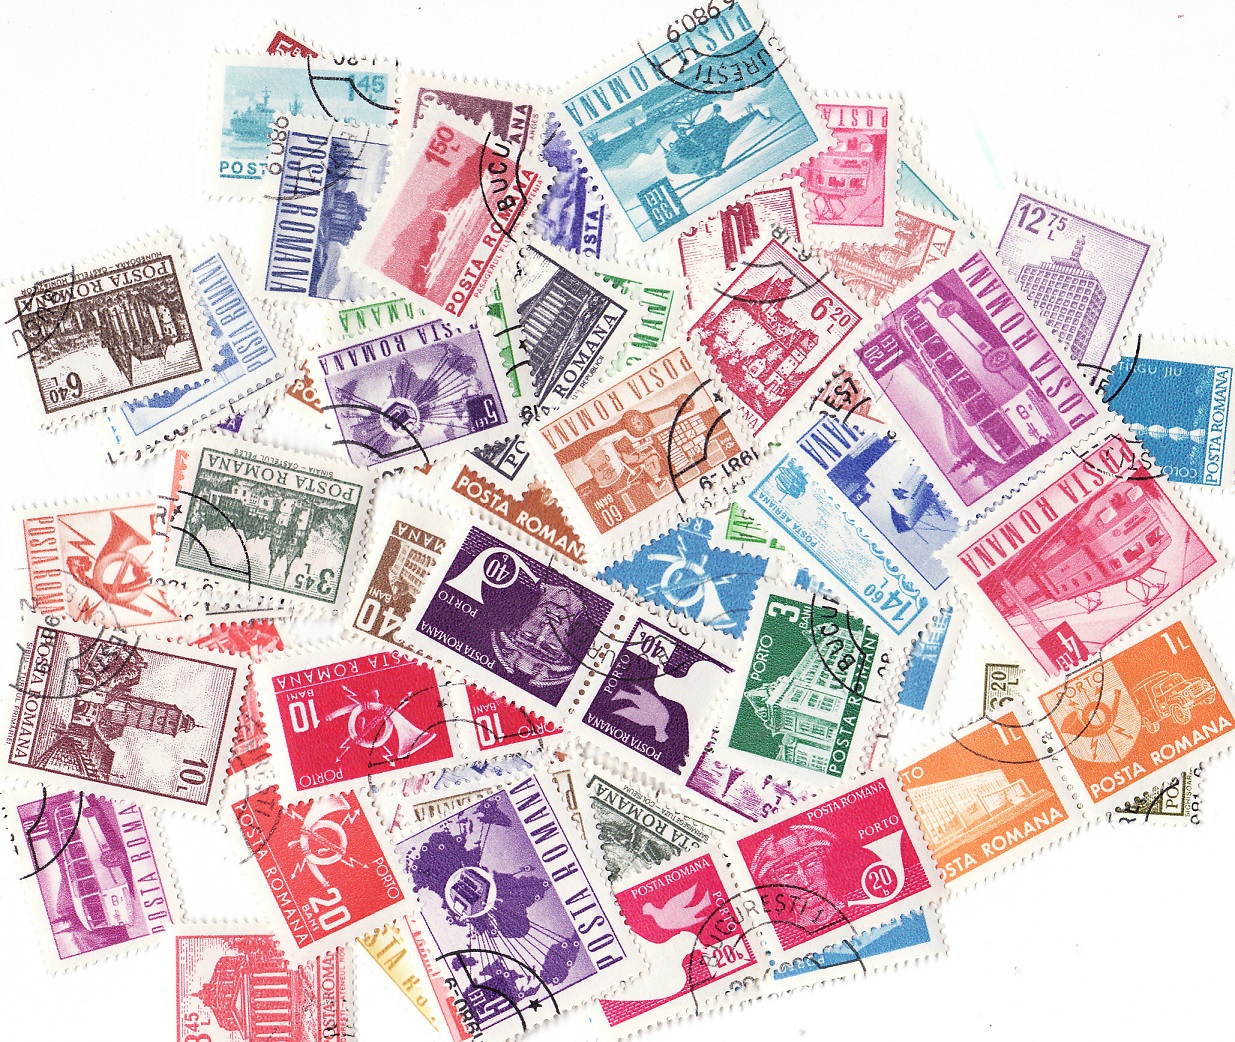 Romania Stamp Packet, 100 different stamps from Romania